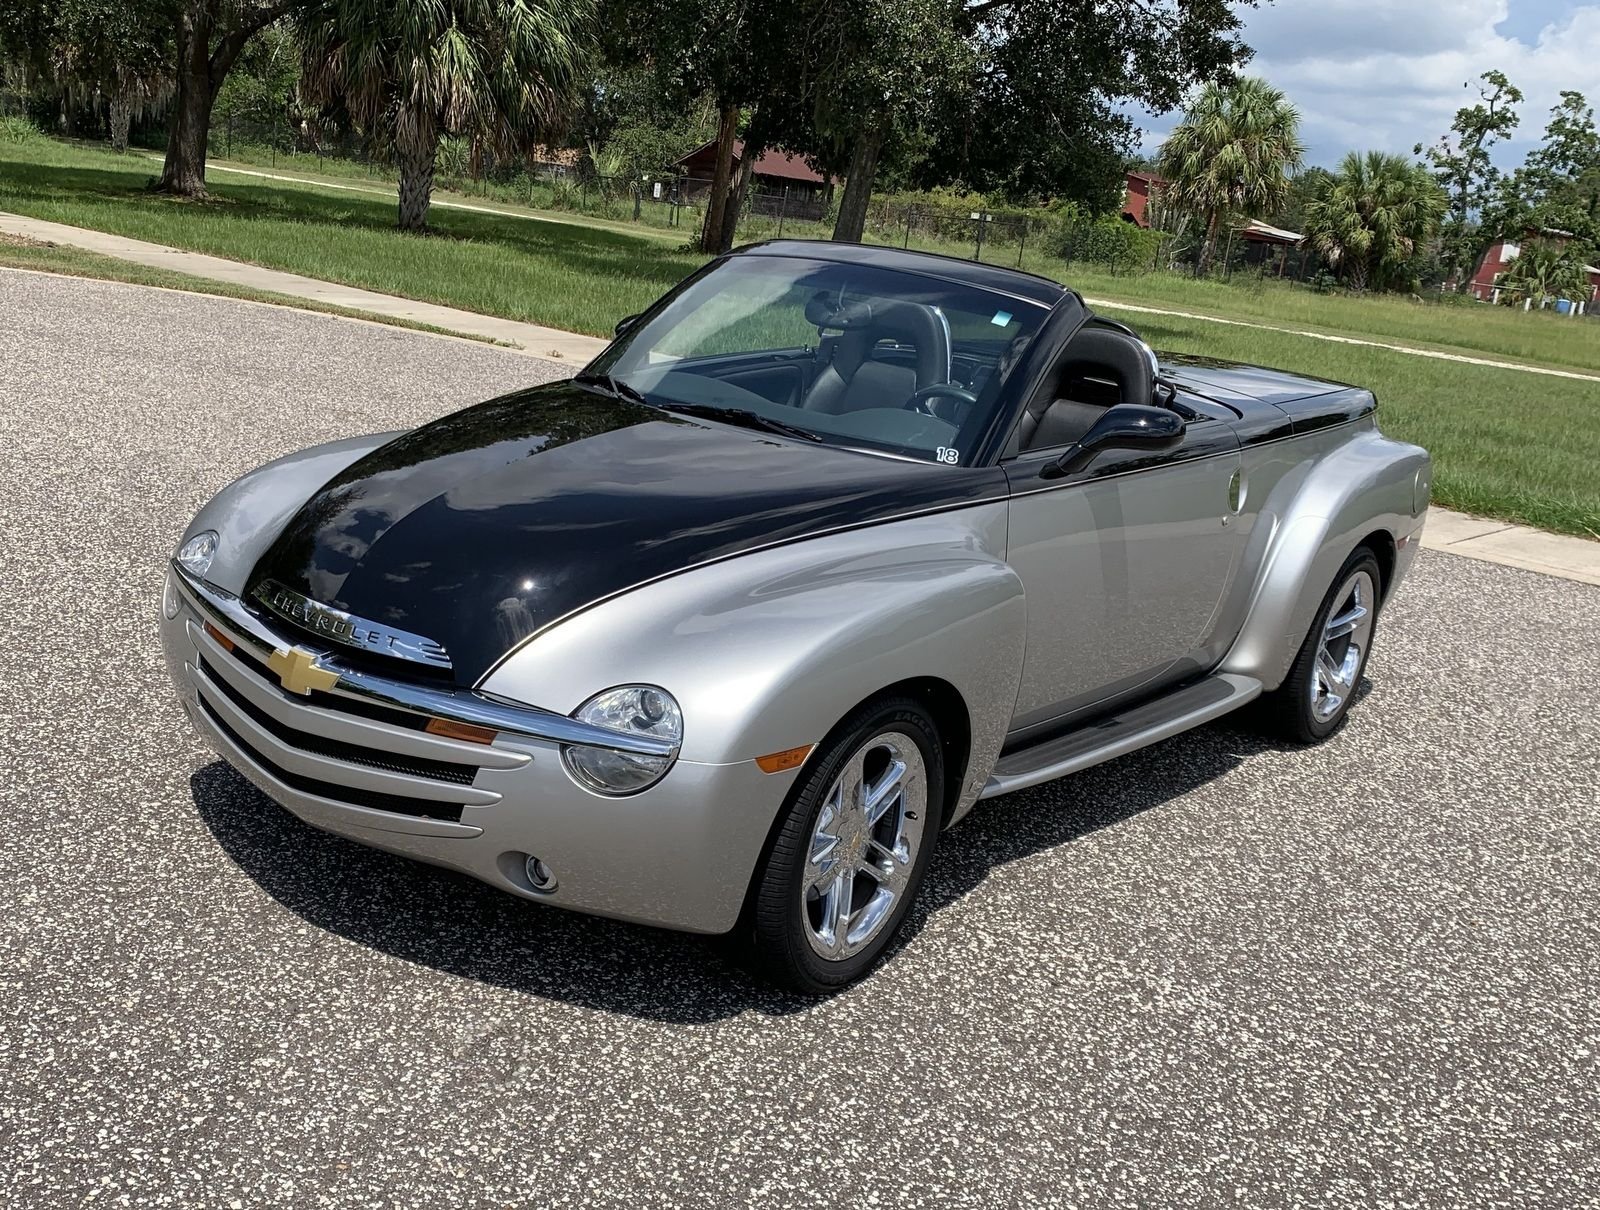 2006 chevrolet ssr indianapolis brickyard pace car